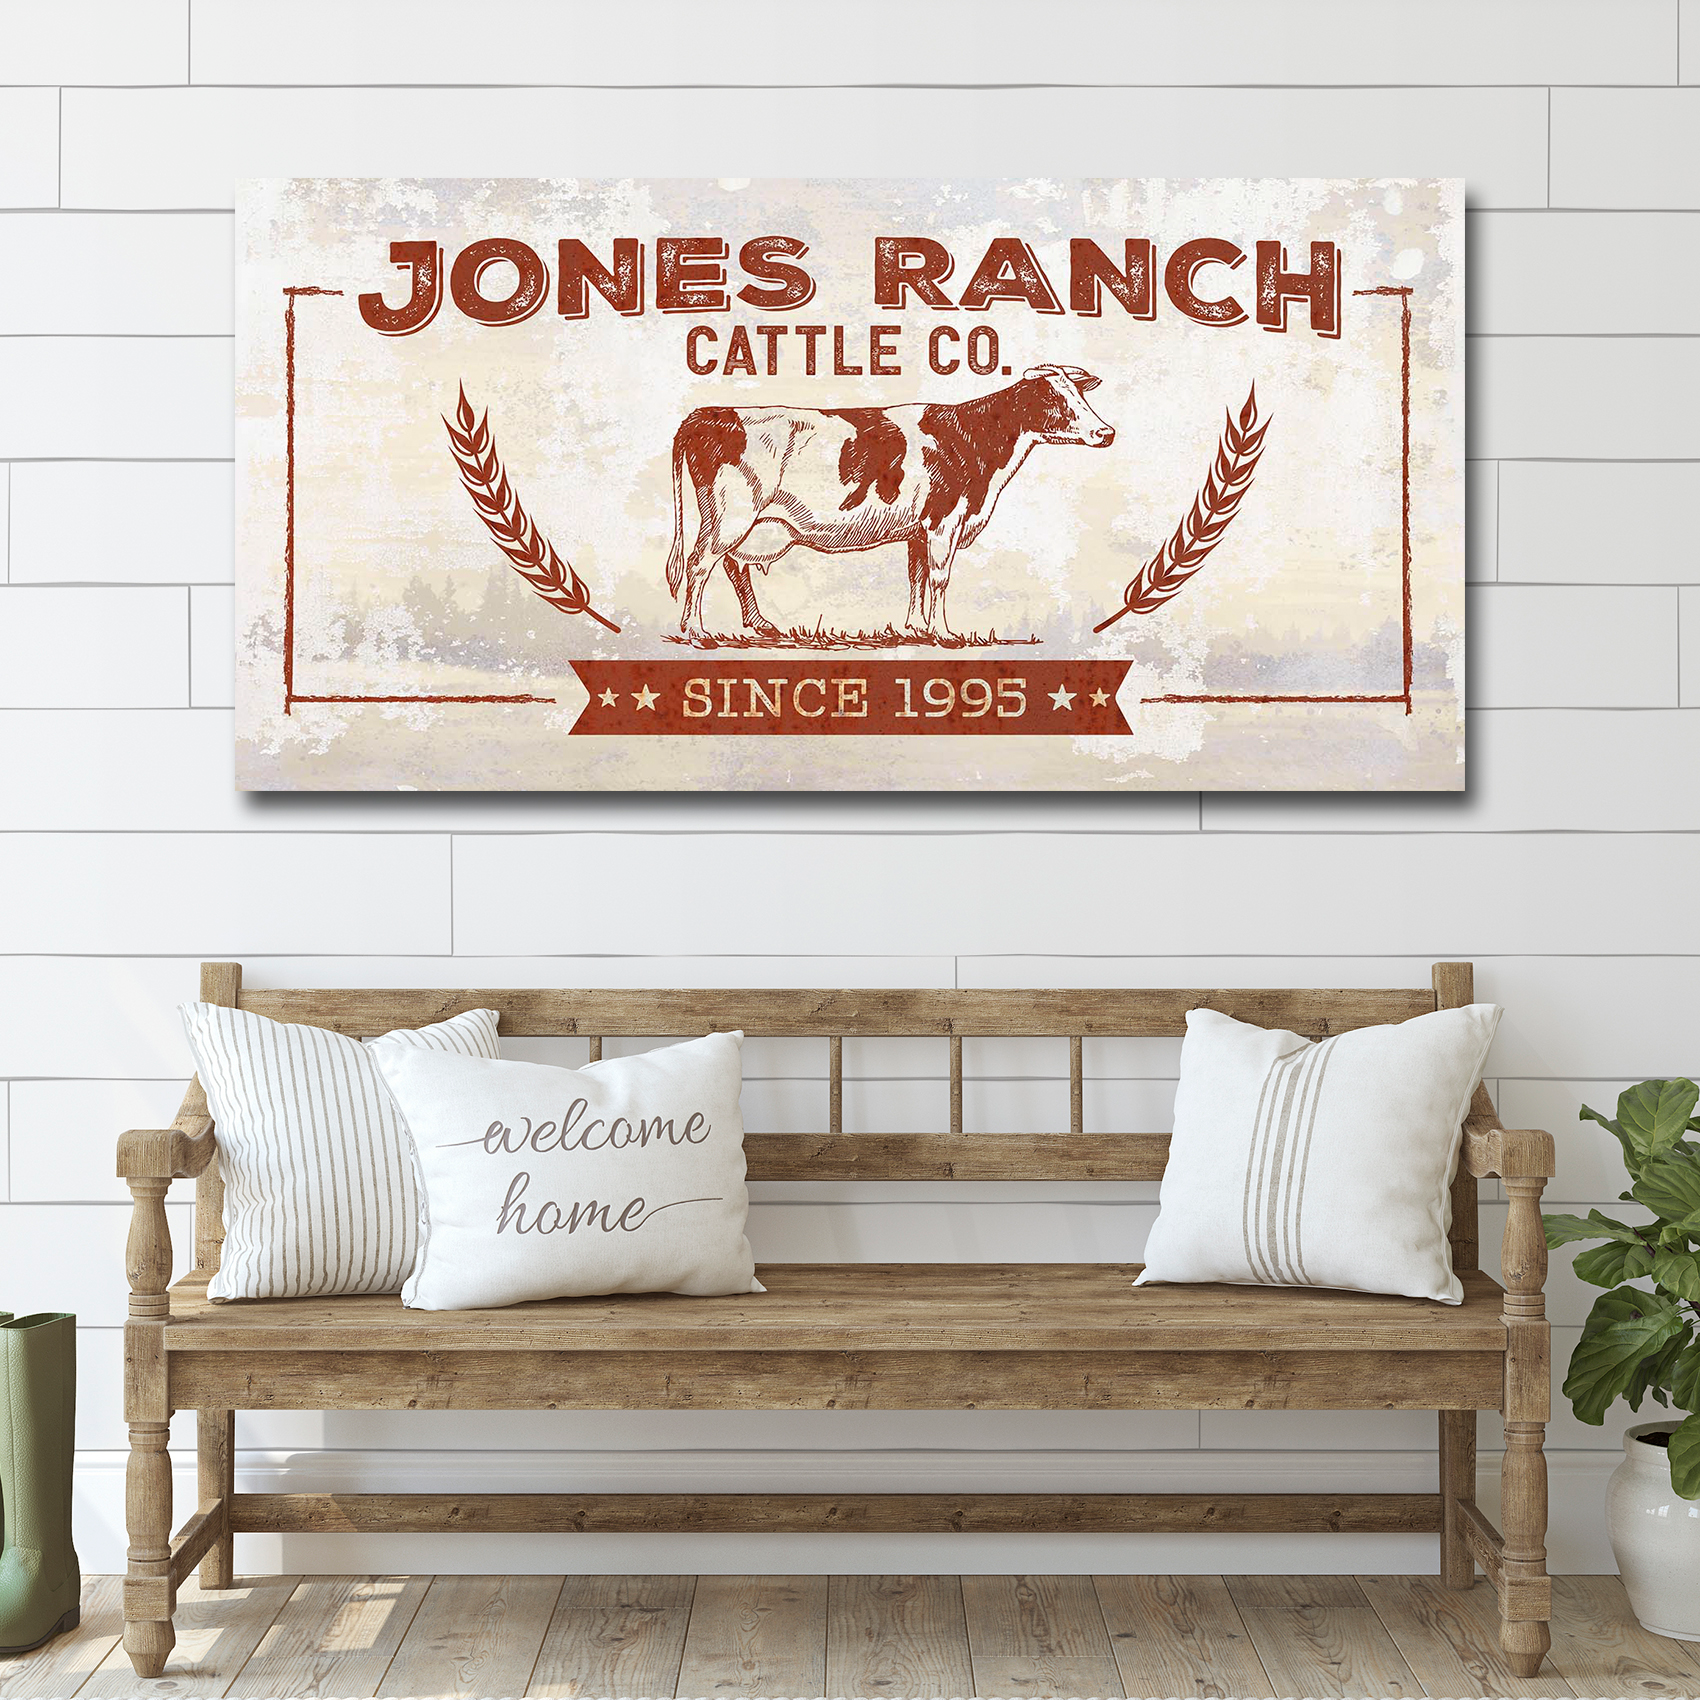 Ranch Cattle Co Rustic Sign - Image by Tailored Canvases